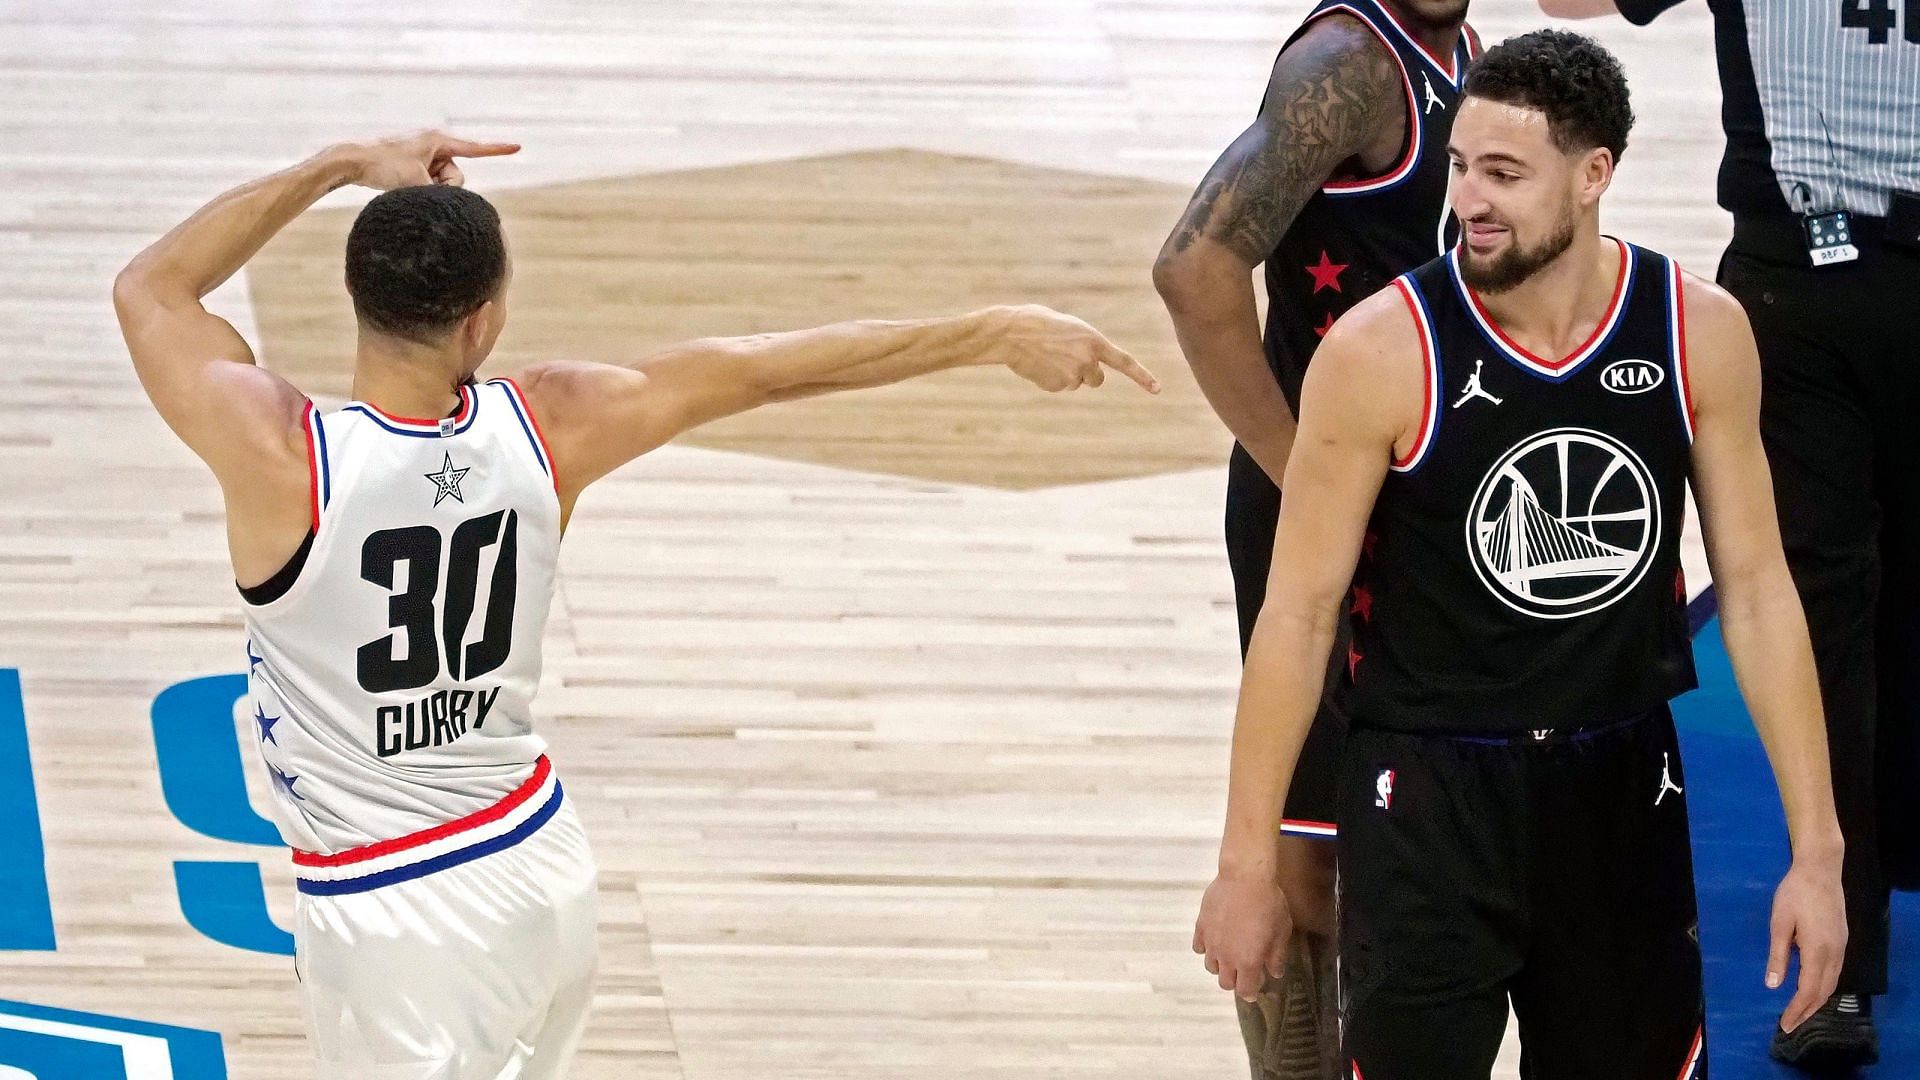 Steph Curry and Klay Thompson had a battle for the ages in the 2016 Three-Point Competition. [Photo: USA Today]